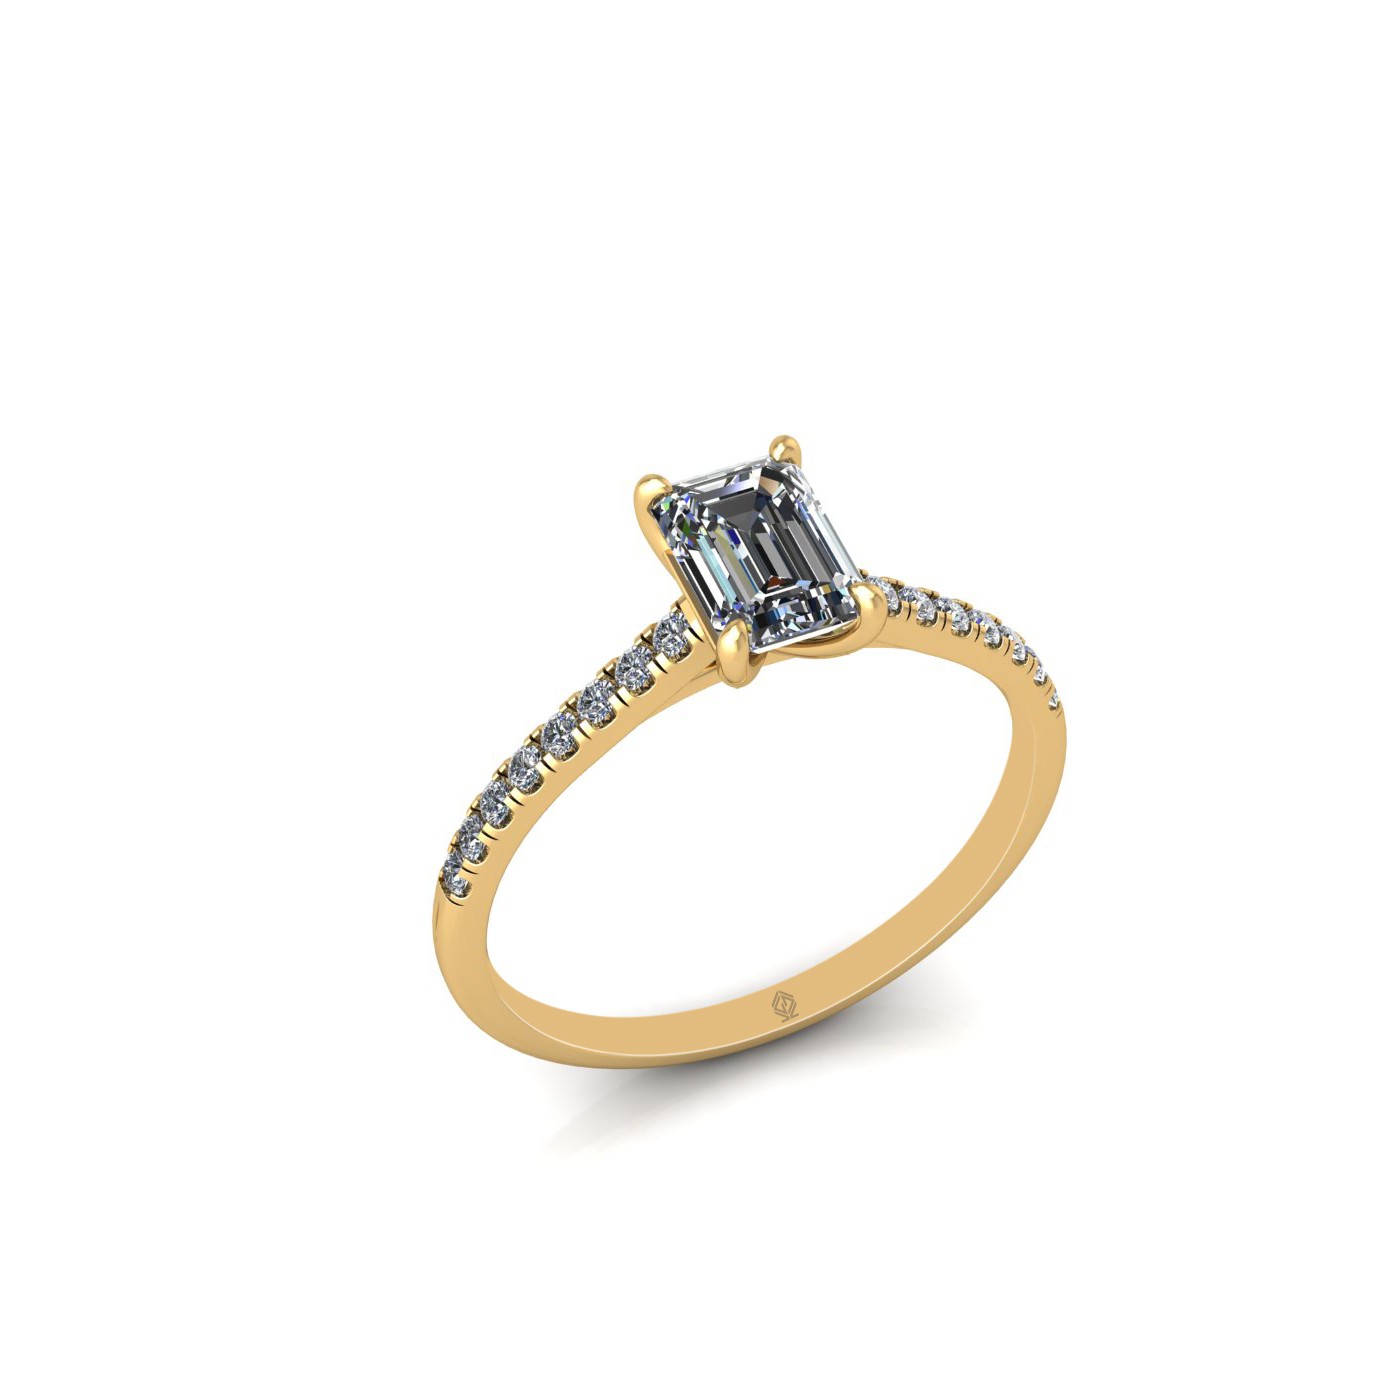 18k yellow gold  0,30 ct 4 prongs emerald cut diamond engagement ring with whisper thin pavÉ set band